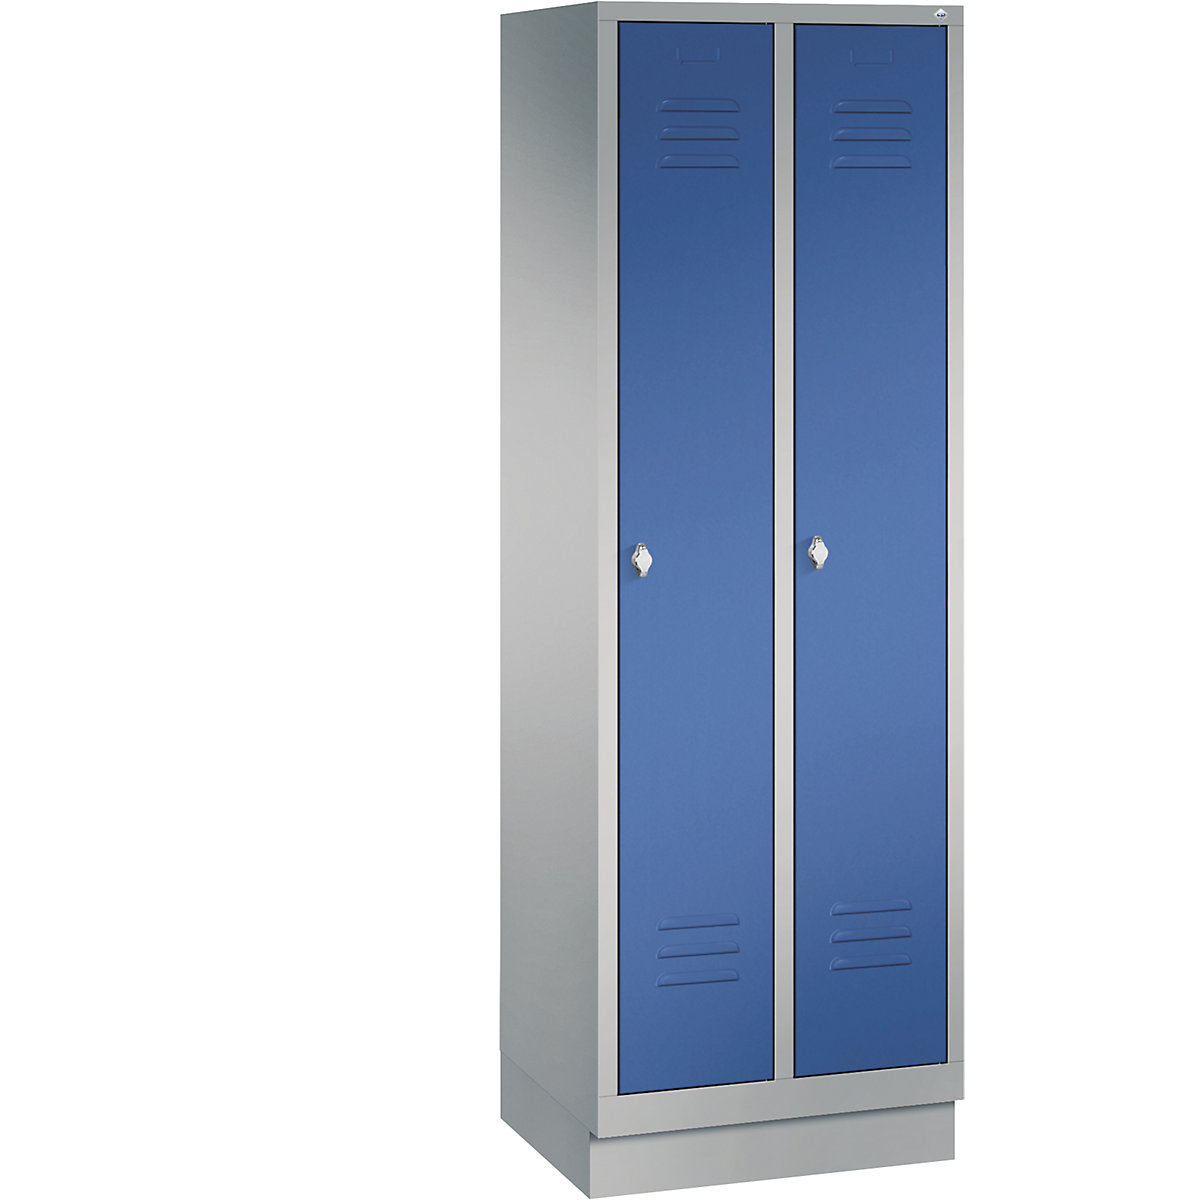 CLASSIC storage cupboard with plinth – C+P, 2 compartments, compartment width 300 mm, white aluminium / gentian blue-8